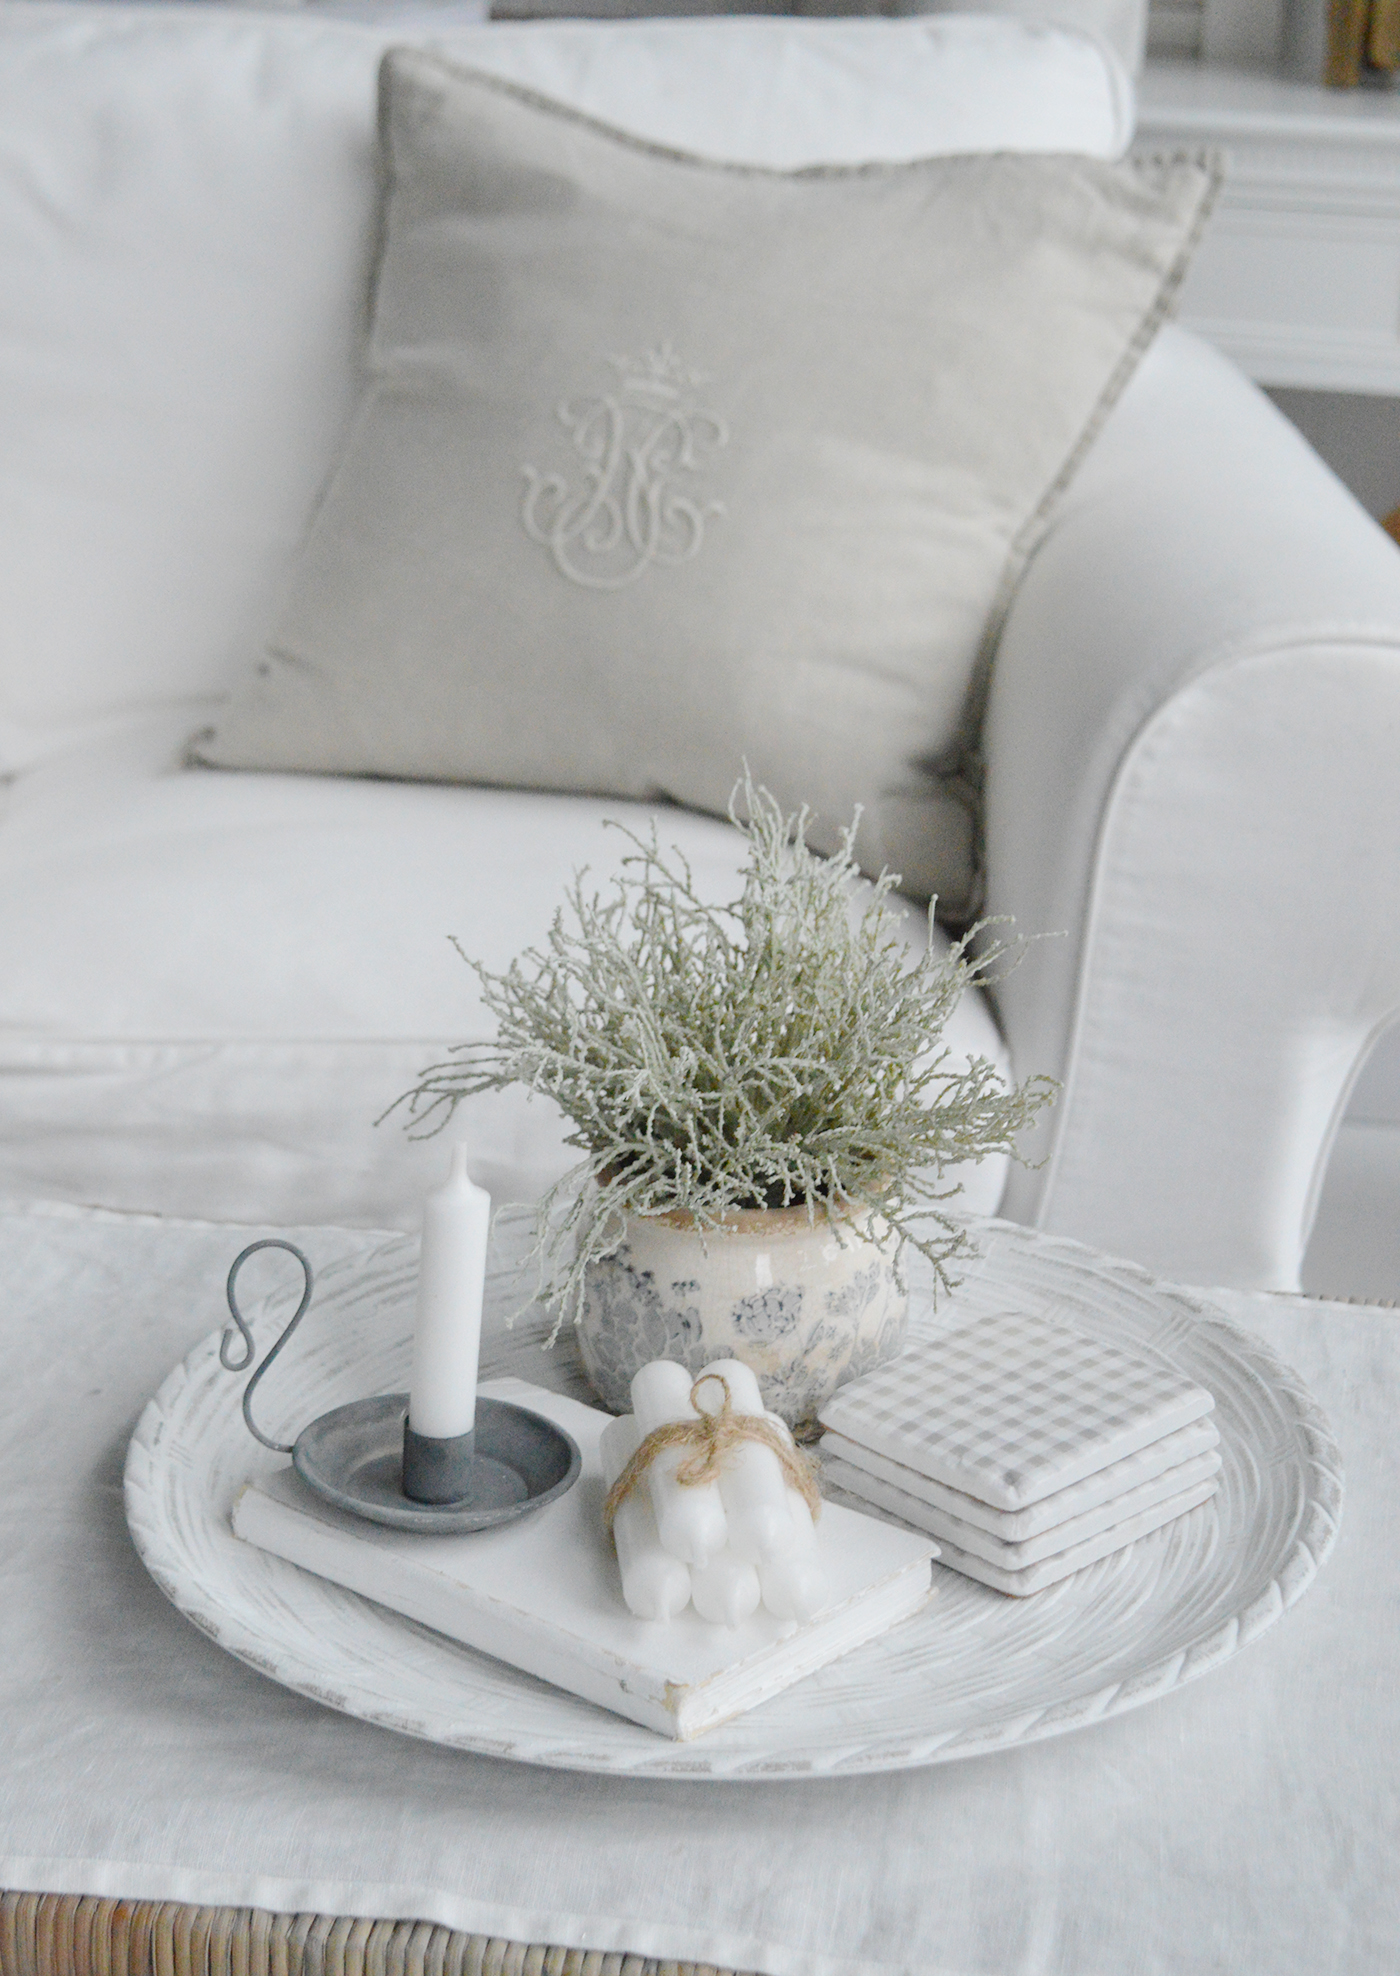 Berwick white washed Wooden Tray - Coffee Table Styling. Modern country, coastal and farmhouse styling and interiors